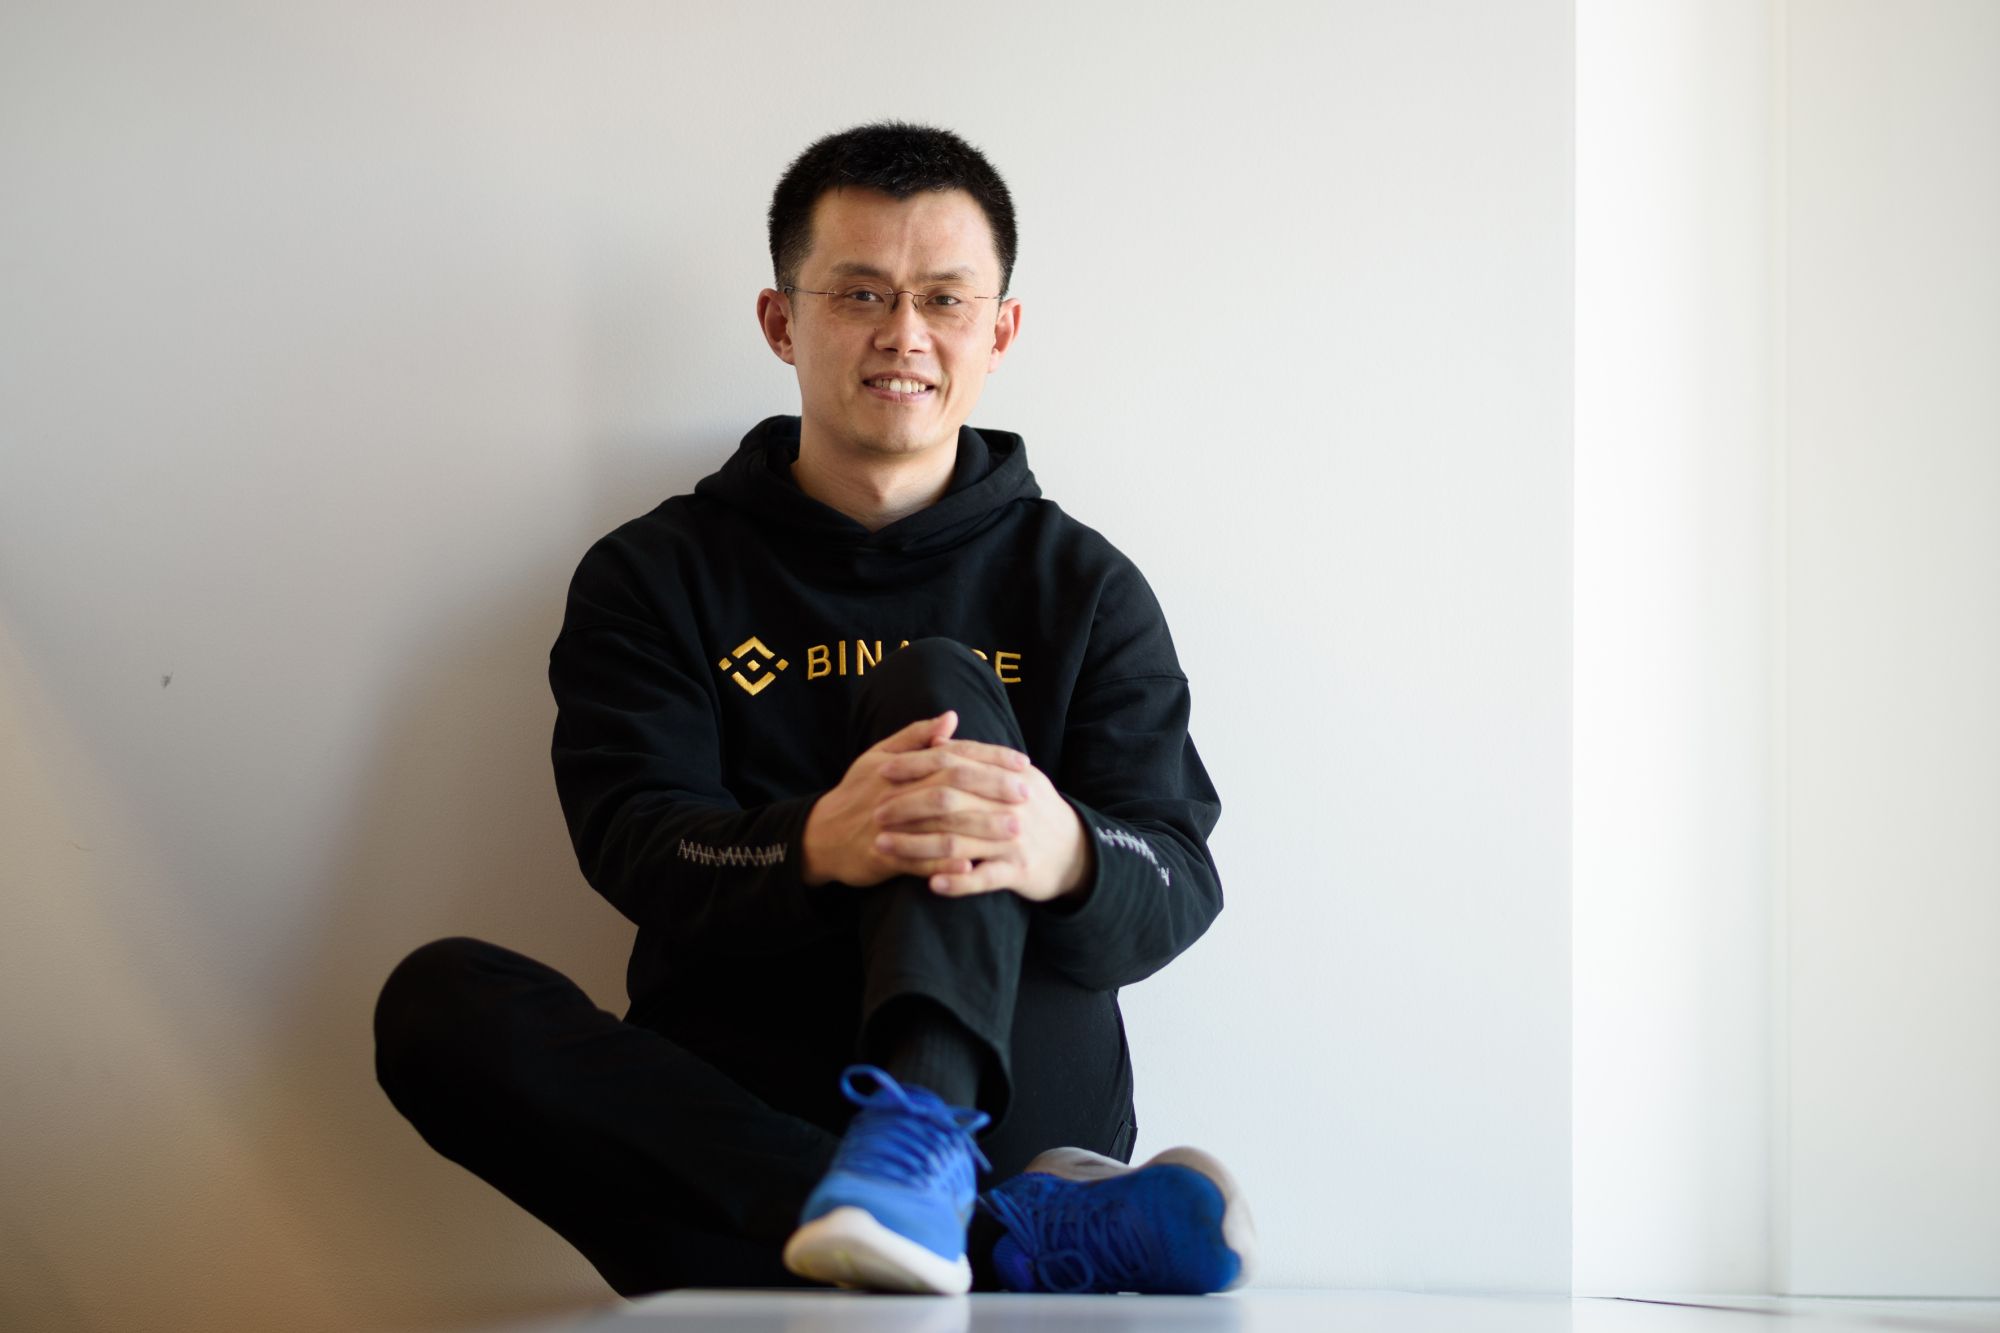 featured image - "Interoperability Would Mean Real Freedom of Money" - Binance CEO CZ [Original Interview]